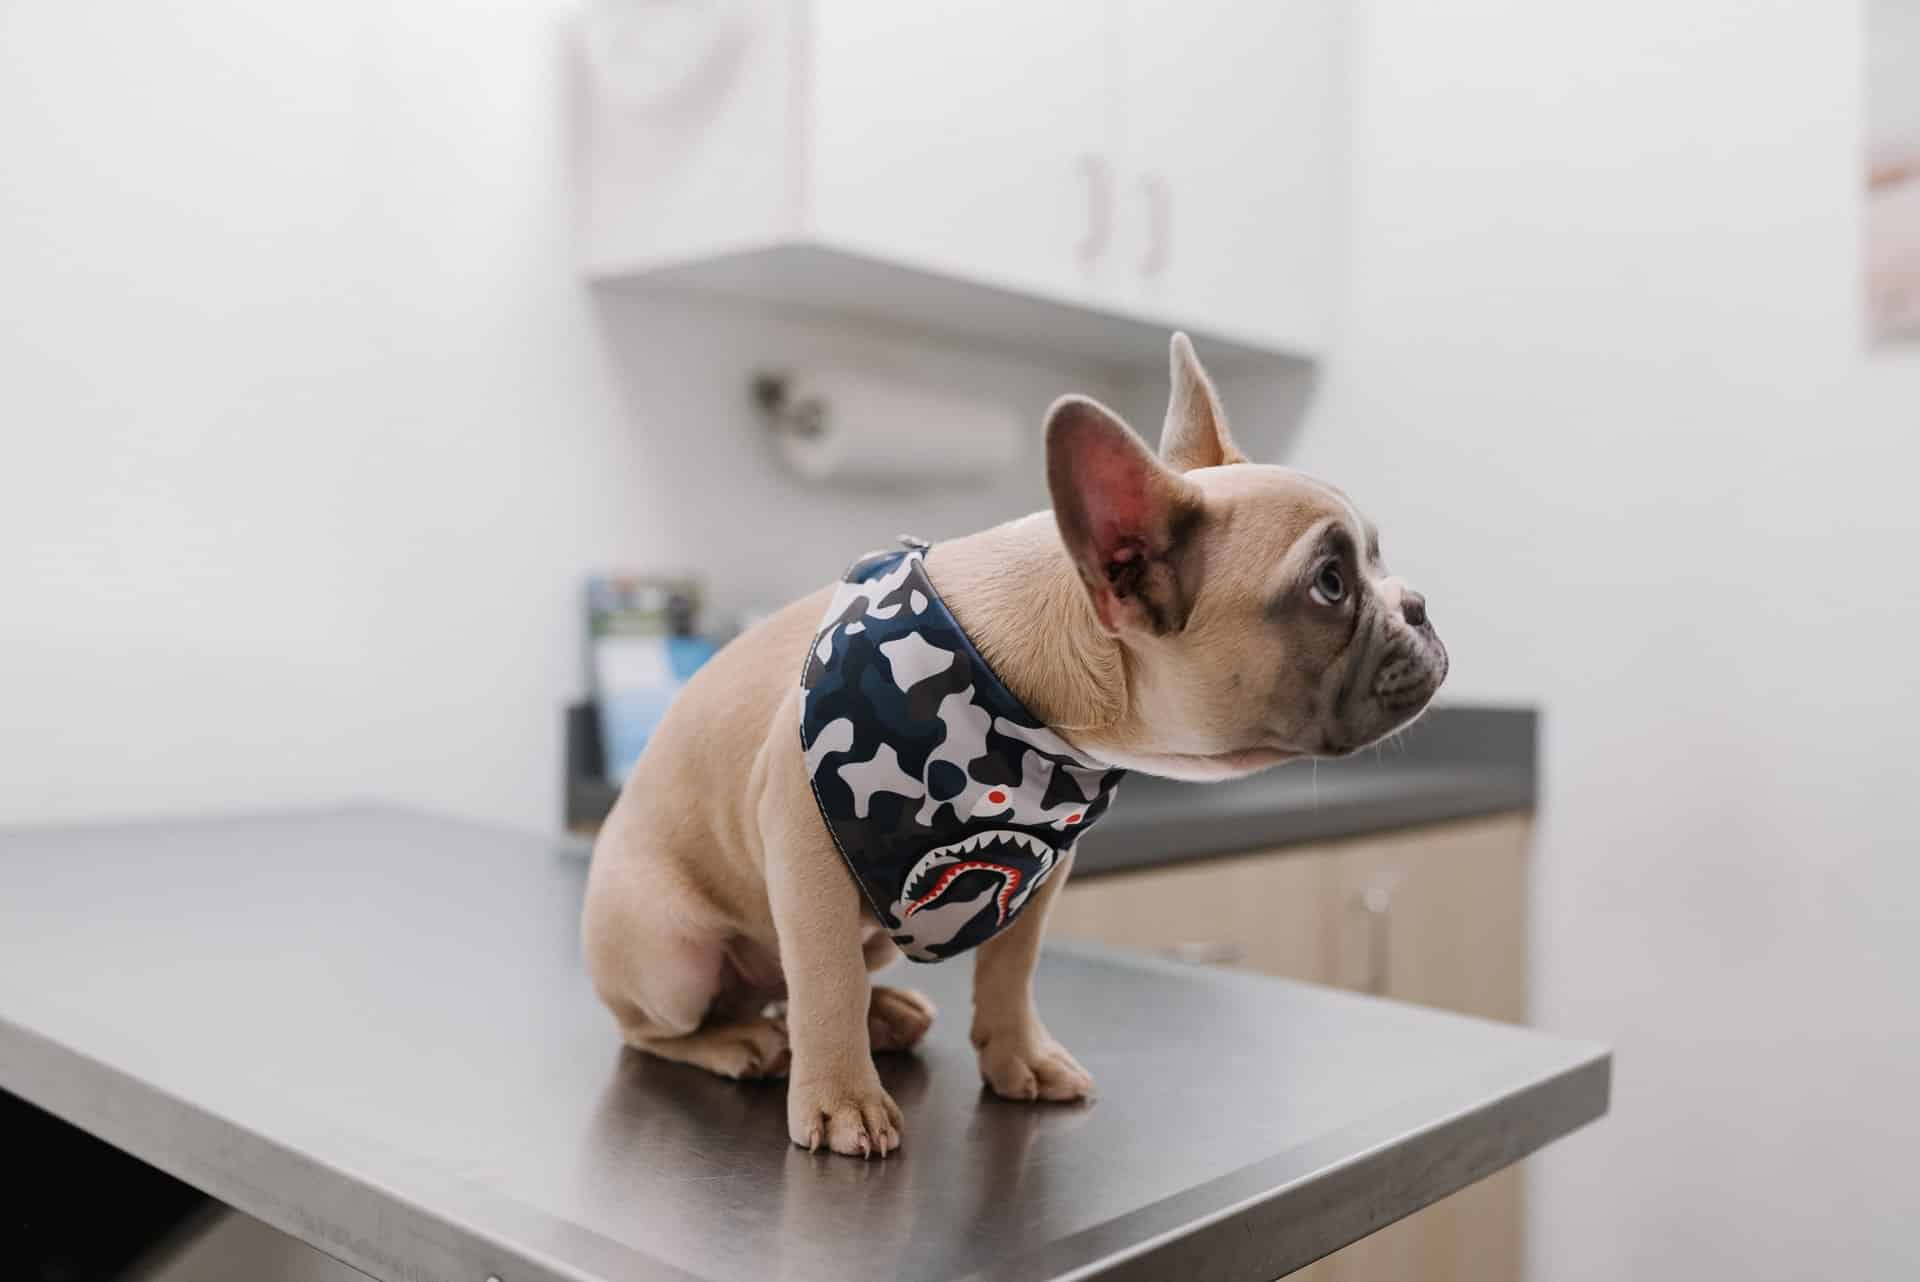 A small French bulldog at a vet's office